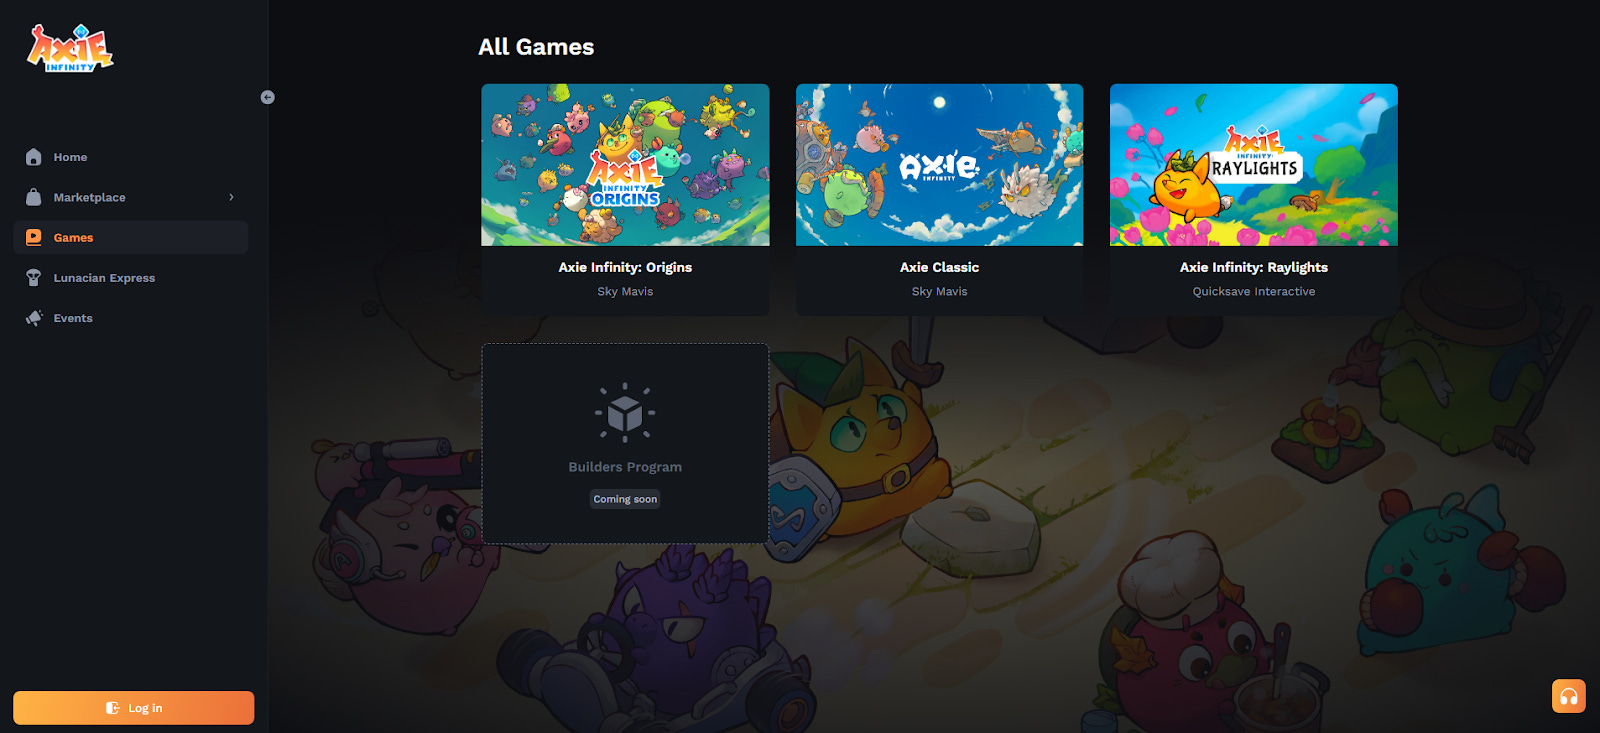 Sky Mavis soft launches Axie Infinity: Origin as a free-to-play title